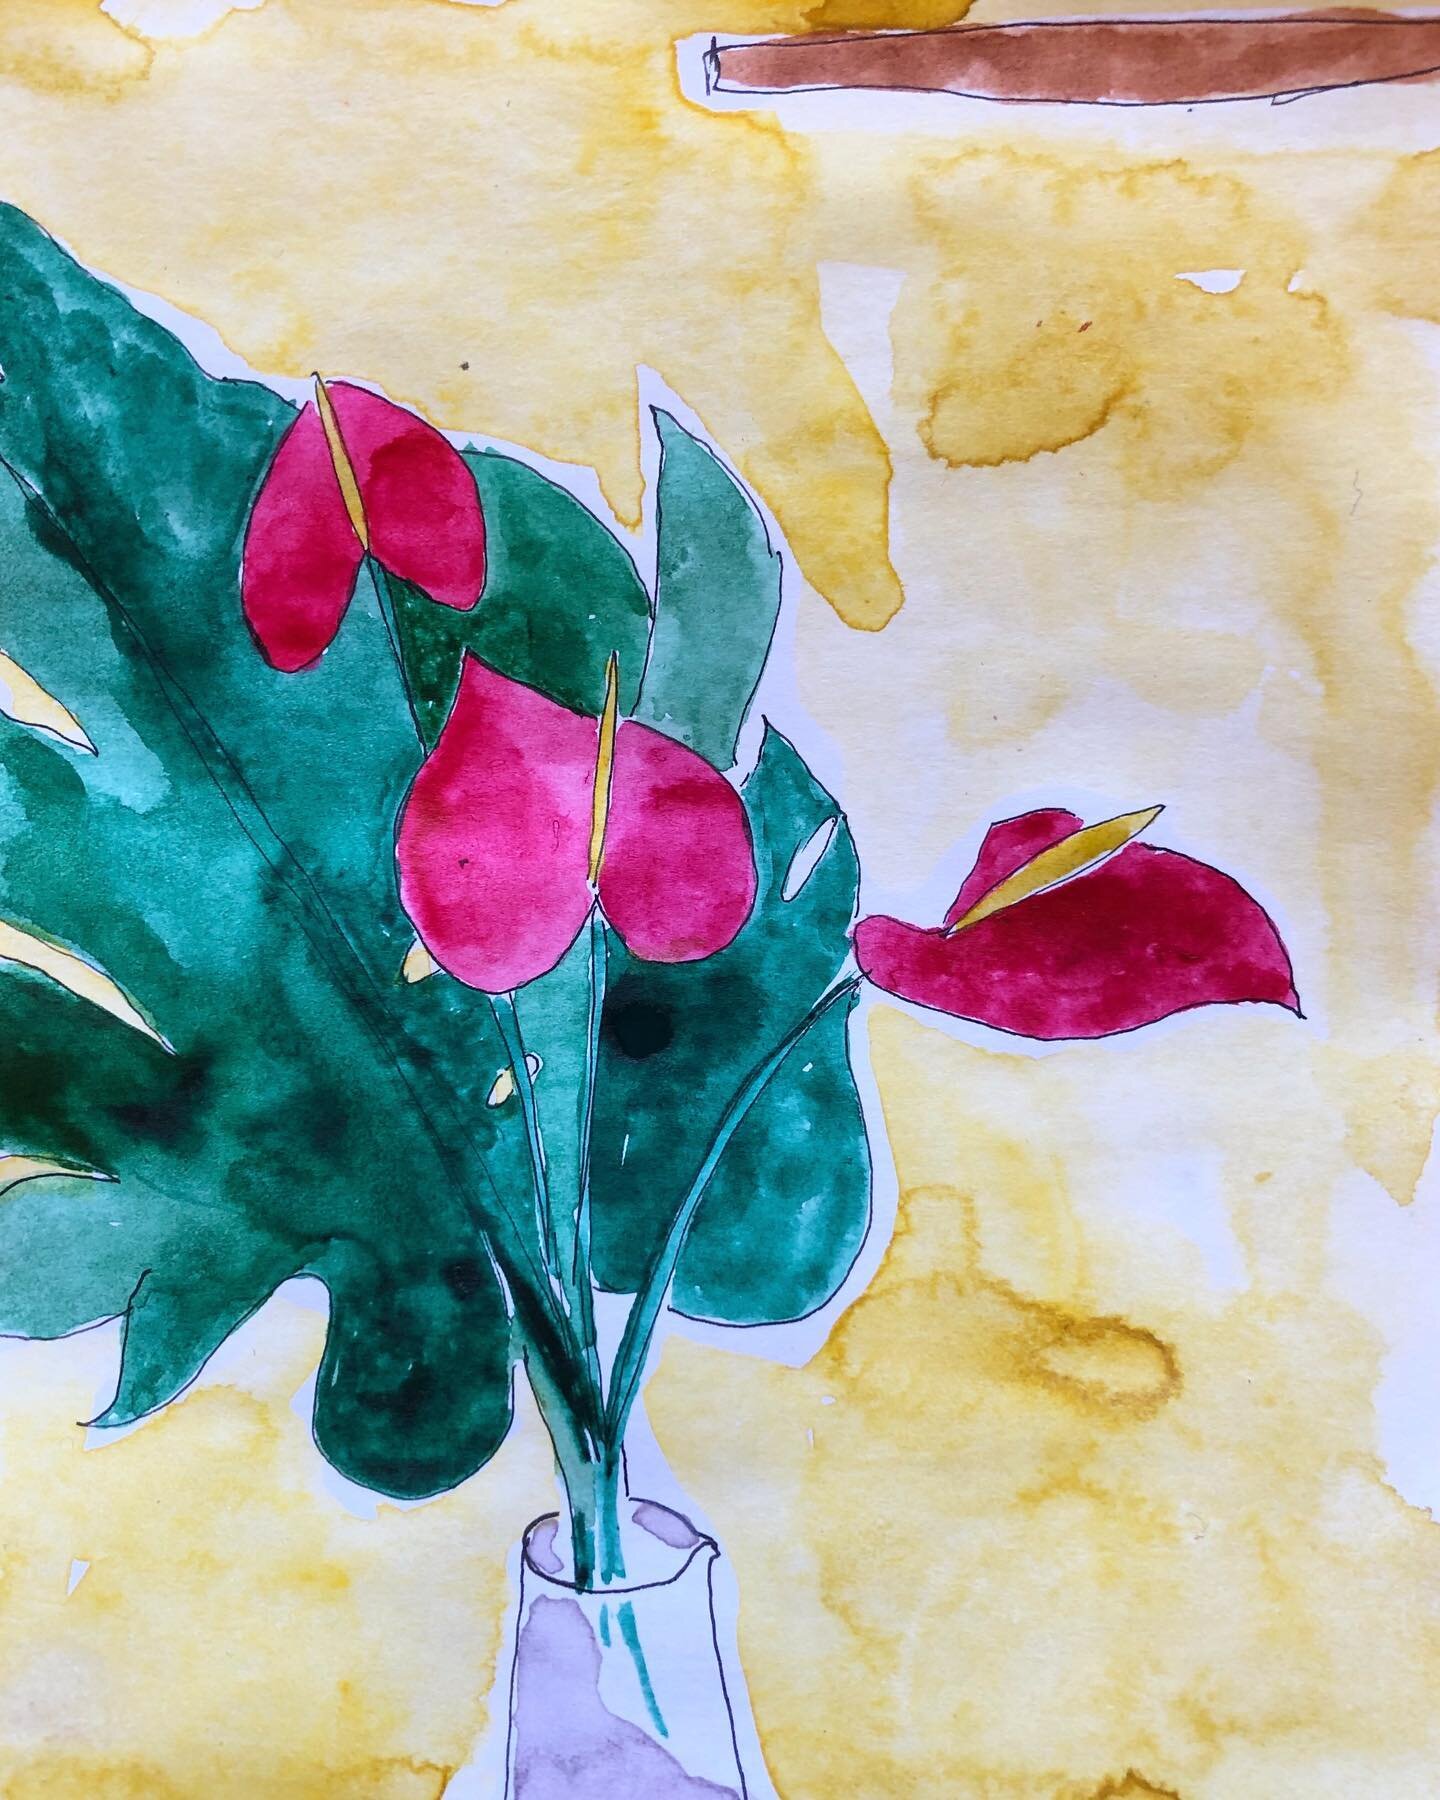 Flowers from a bad day turned good #withthepaintstillwet #illustration watercolor #ikebana